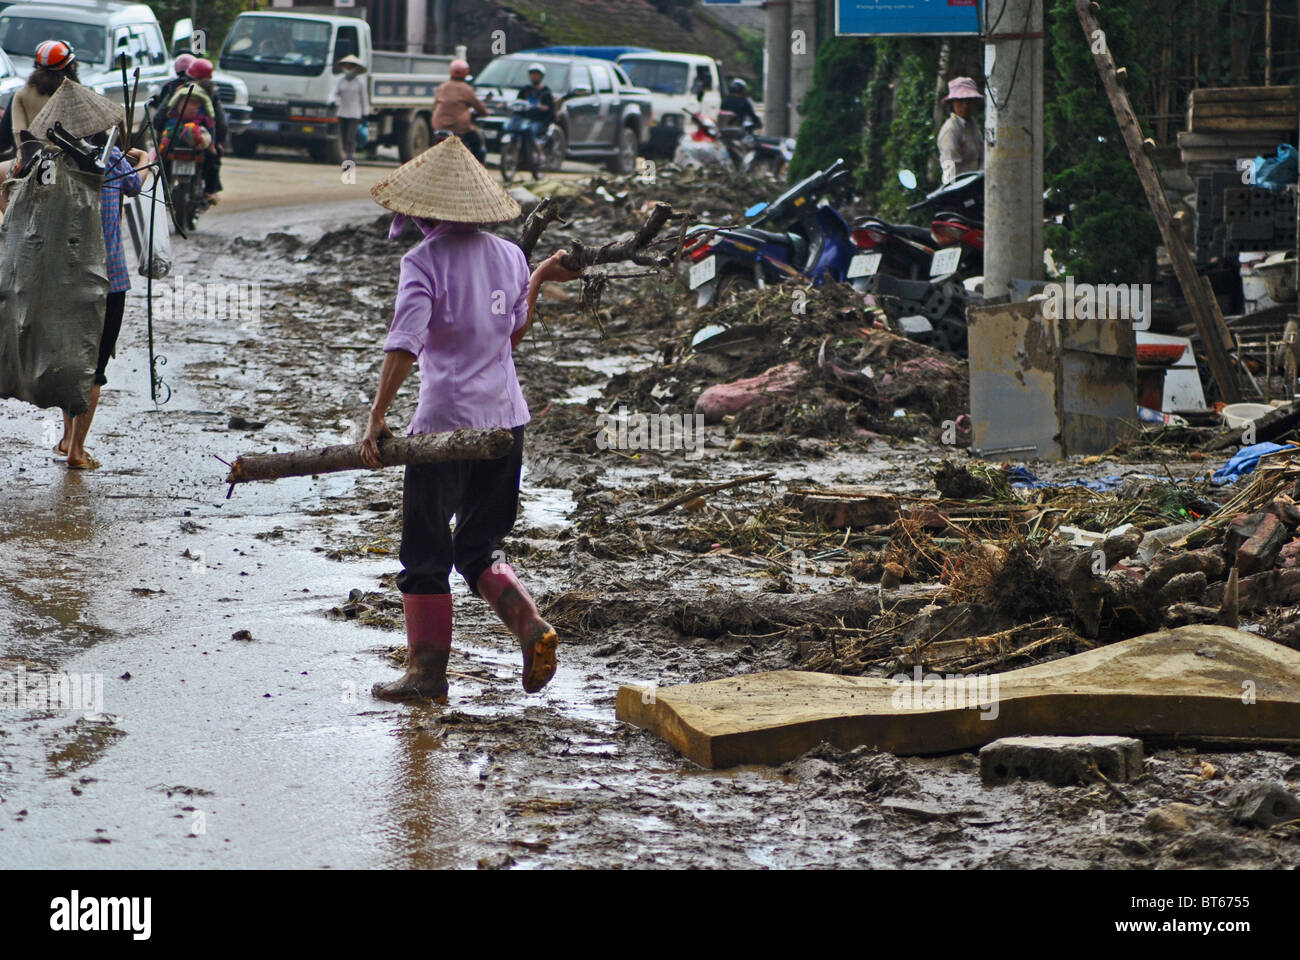 Aftermath of a landslide triggered by heavy rain in Sapa, Vietnam Stock Photo